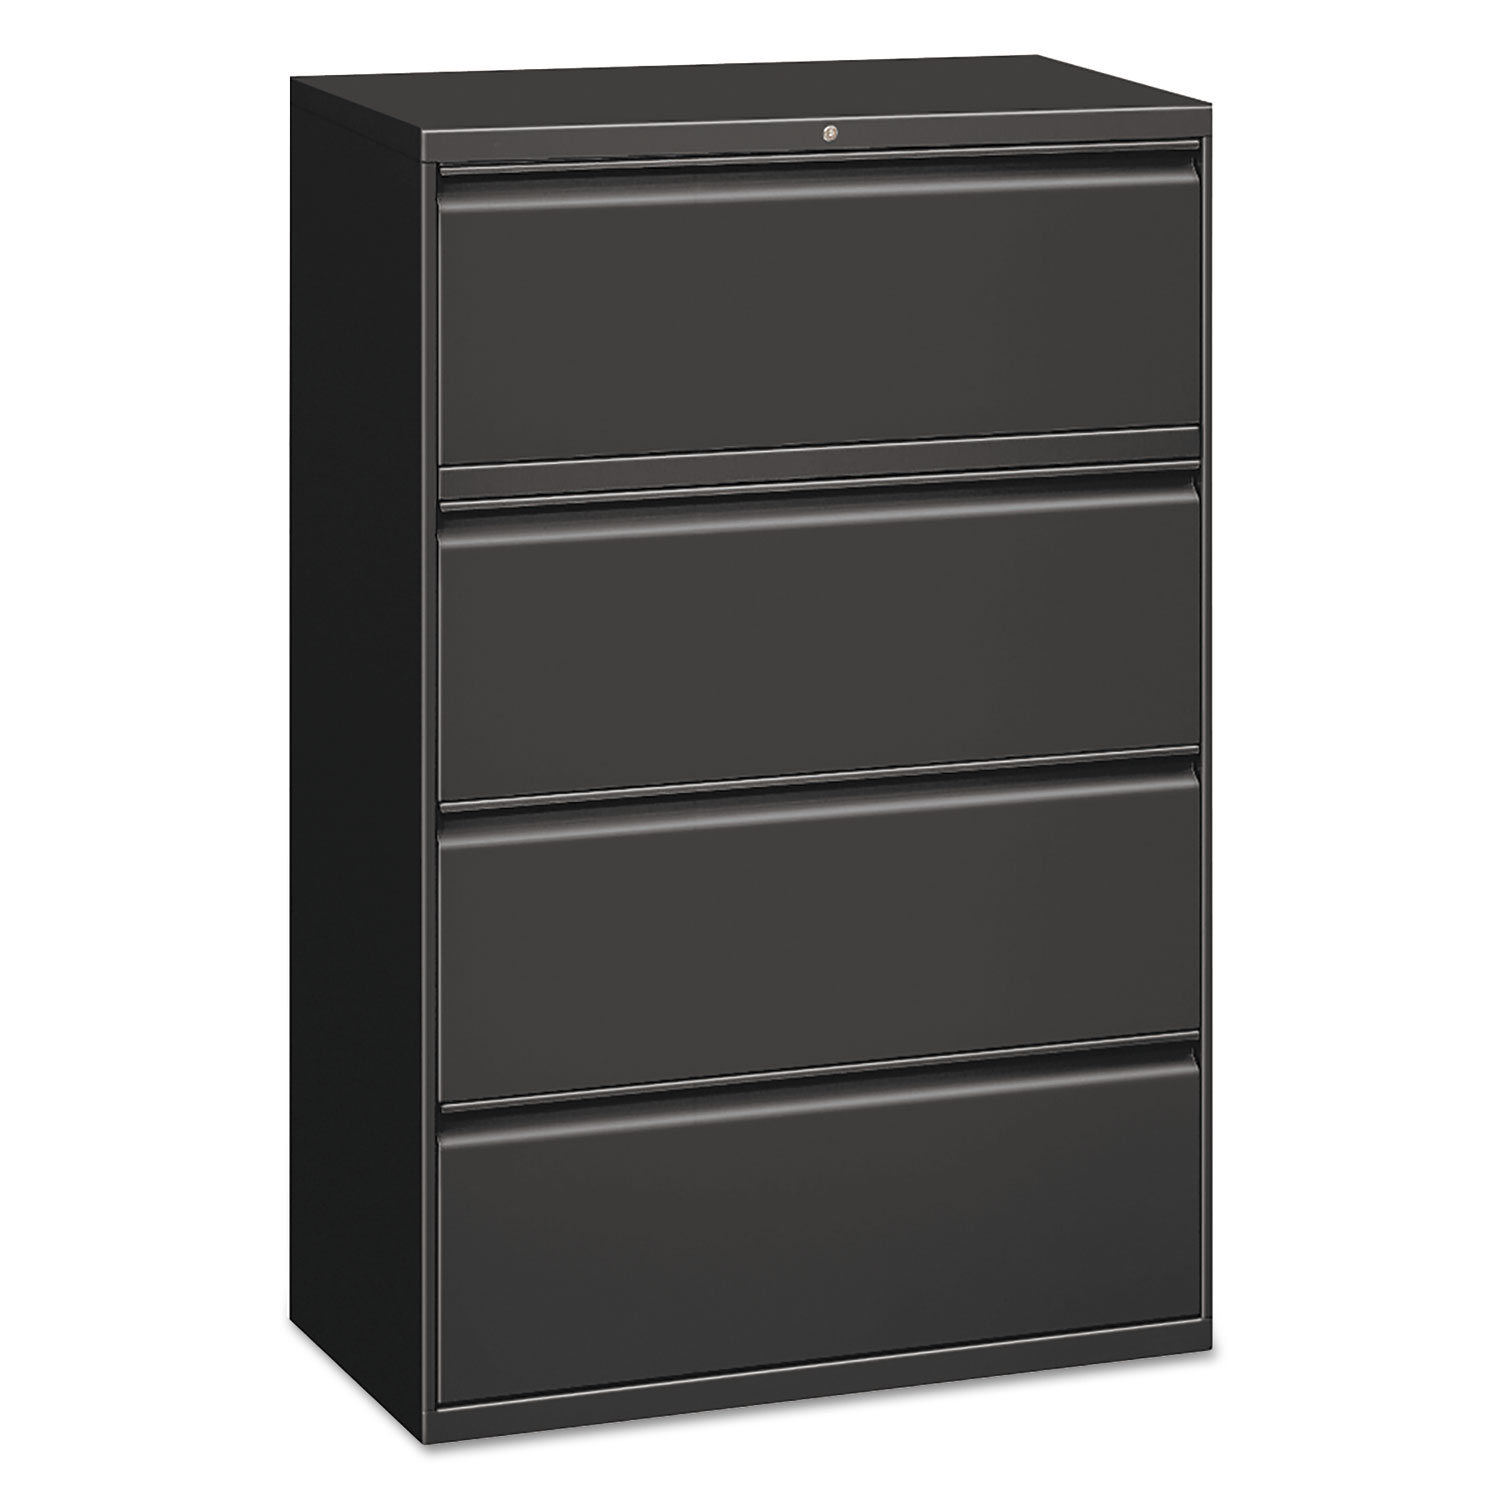 Four-Drawer Lateral File Cabinet, 30w x 18d x 52 1/2h, Charcoal